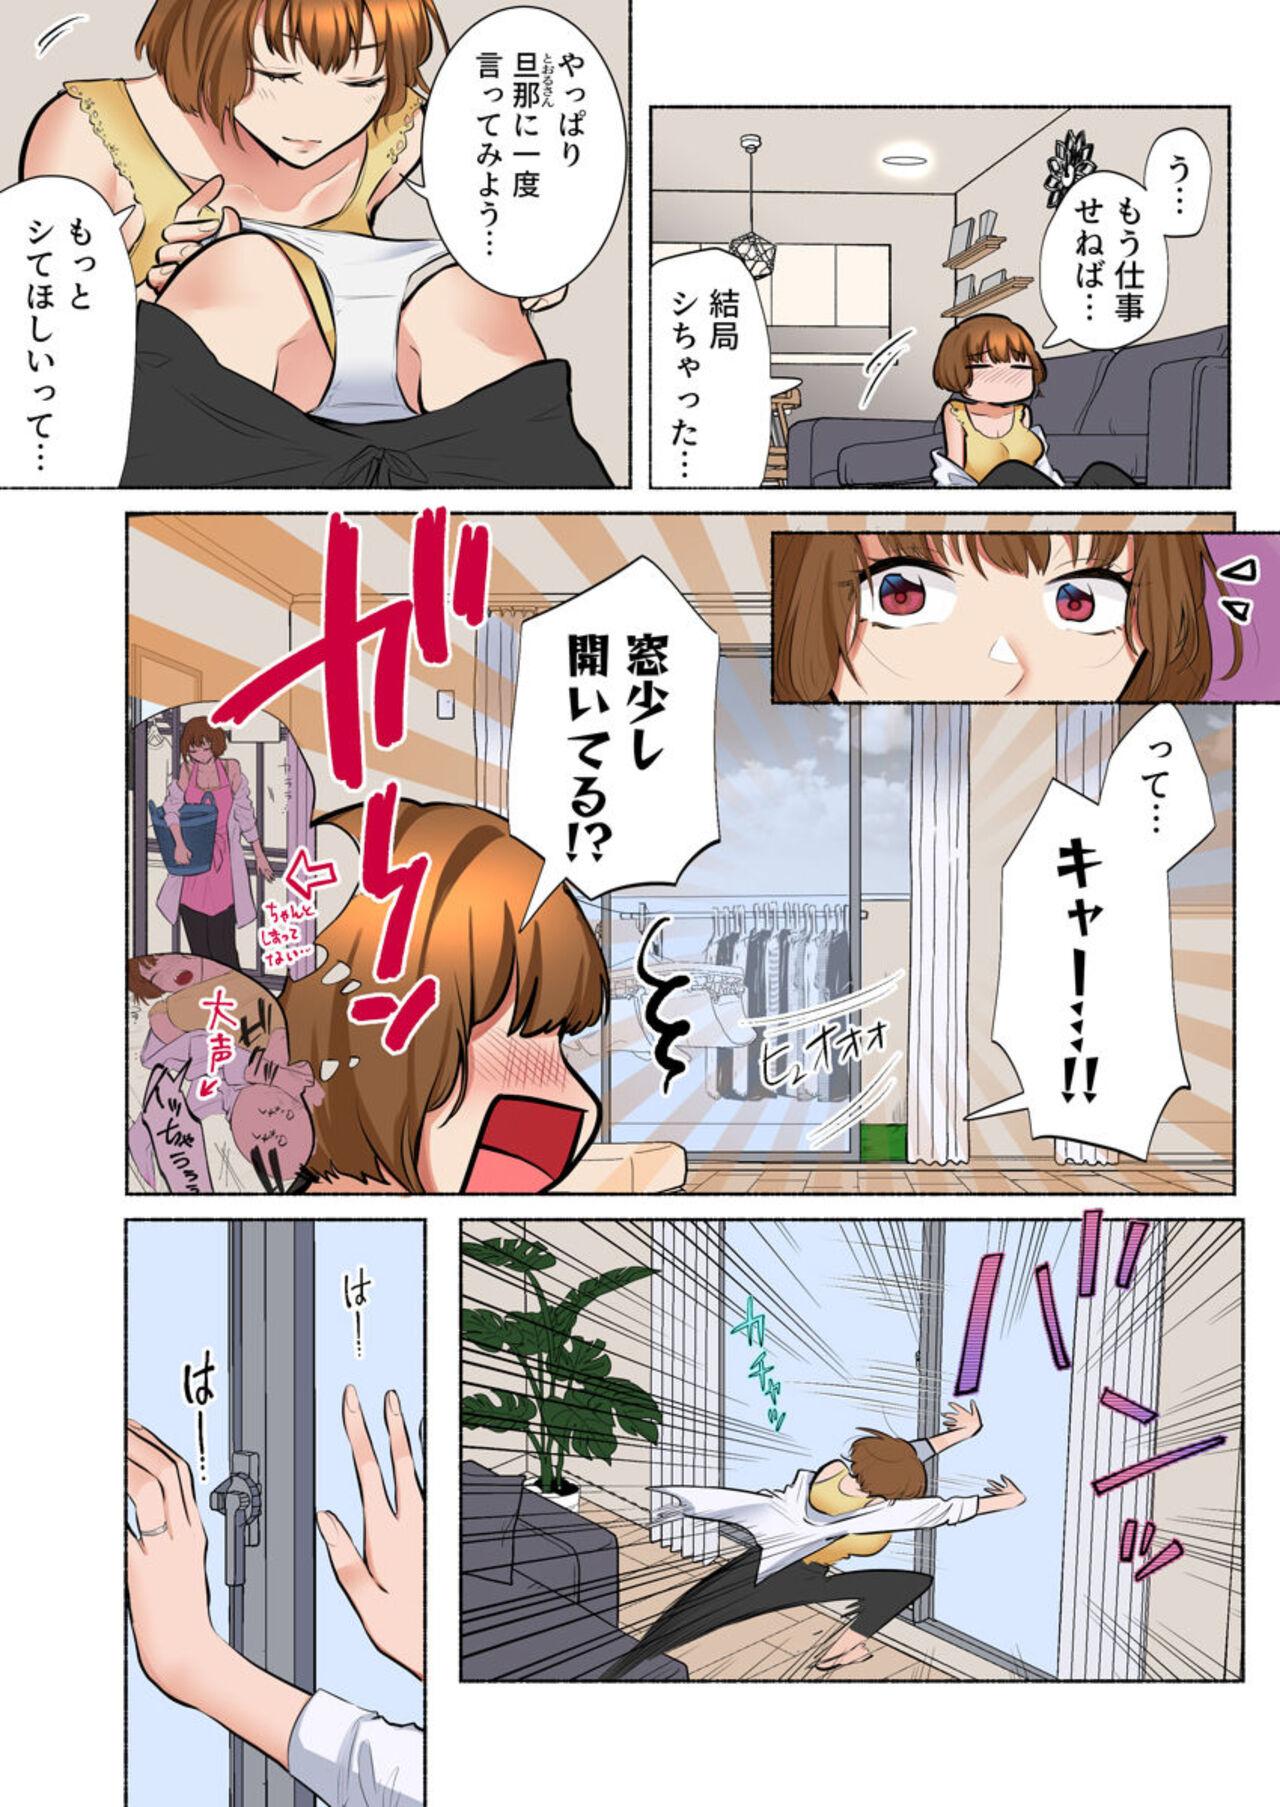 [Ika Hotaru] My Neighbor Is A Sadistic Ex-Boyfriend ~I Love My Husband, But My Aching Body Has Been Redeveloped~ (Full Color) 1 15